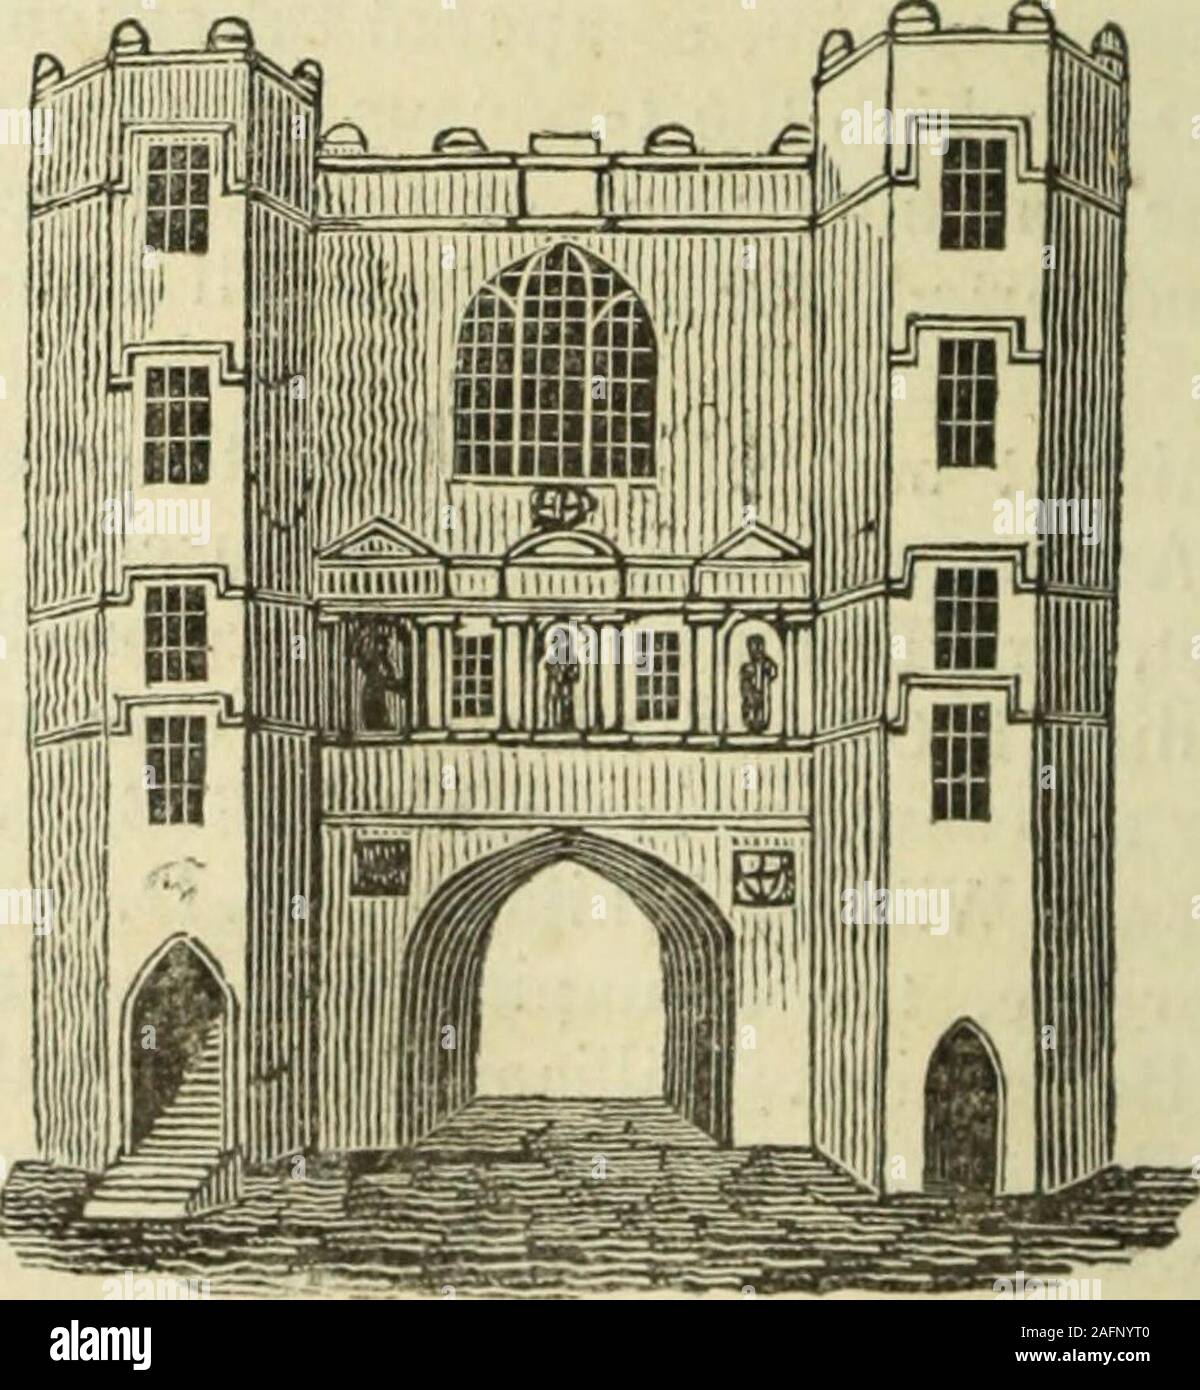 . The history and antiquities of London, Westminster, Southwark and parts adjacent. pencer Compton, speaker of the House of Commons. ThomasBentley, LL. D. of Trinity College, Cambridge, the celebratedcritic. James, earl of Derby. Roger Gale, esq. rev. Charles Gale,Samuel Gale, esq. all eminent antiquaries. Rev. Dr. Gregg, masterof Clare Hall, Cambridge. Rev. James Johnson, LL. D. chancel-lor of Ely. Algernon, earl of Montrath. Charles, earl of Orrery,the enlightened philosopher. Rev. John Strype, editor of StowsHistory of London, and other valuable works in English history.Dr. Edmund Halley, t Stock Photo